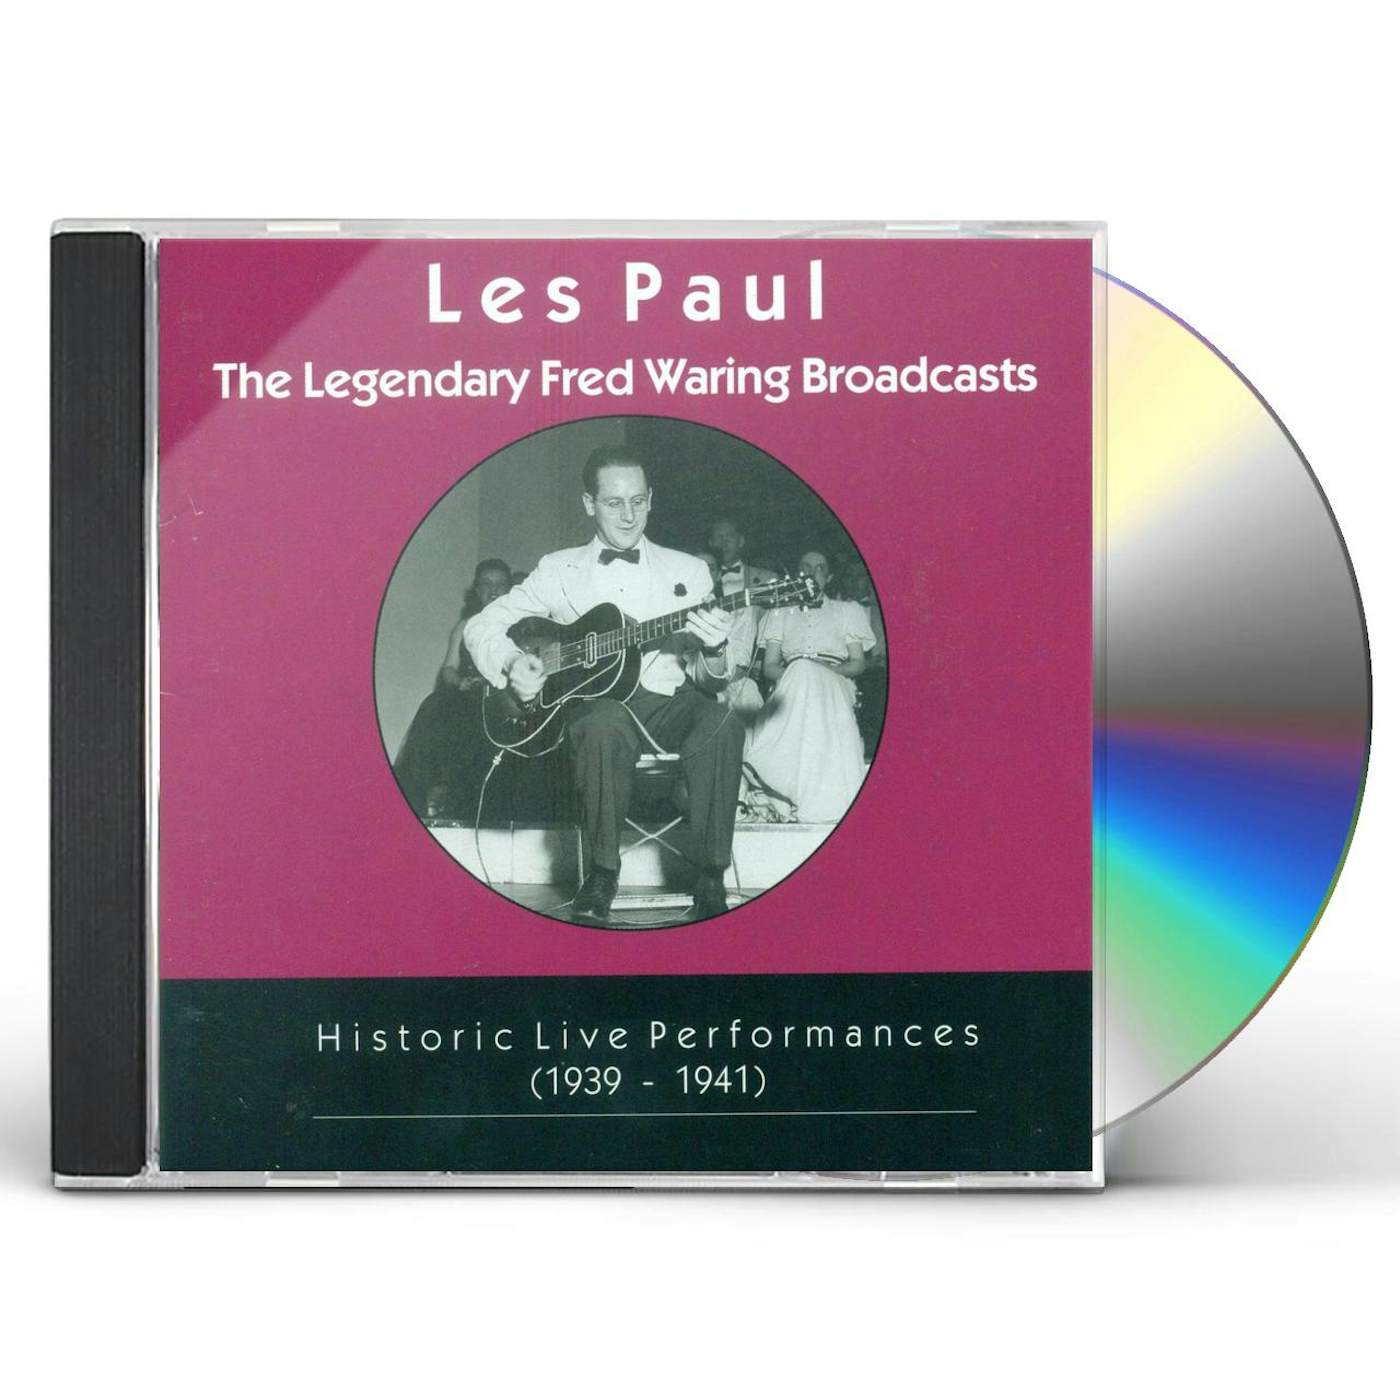 Les Paul LEGENDARY FRED WARING BROADCASTS CD